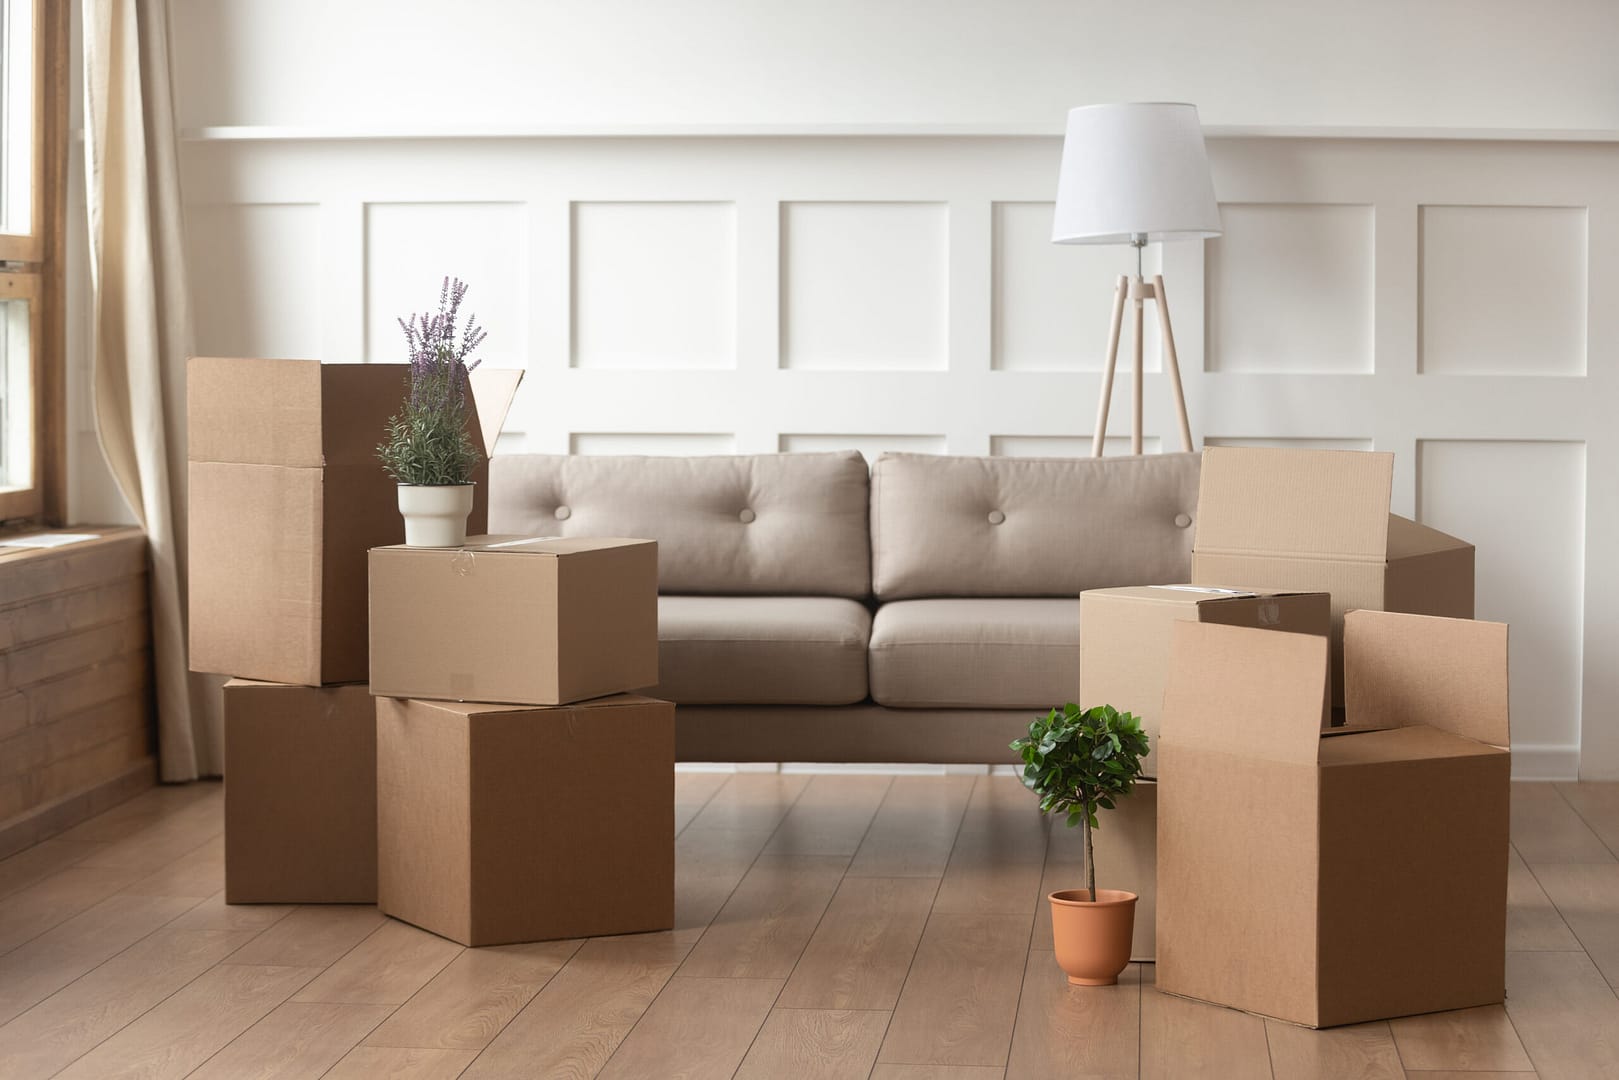 Residential moving day scene with furniture and boxes – Emphasizing the personal touch and care taken by moving companies during home relocations.